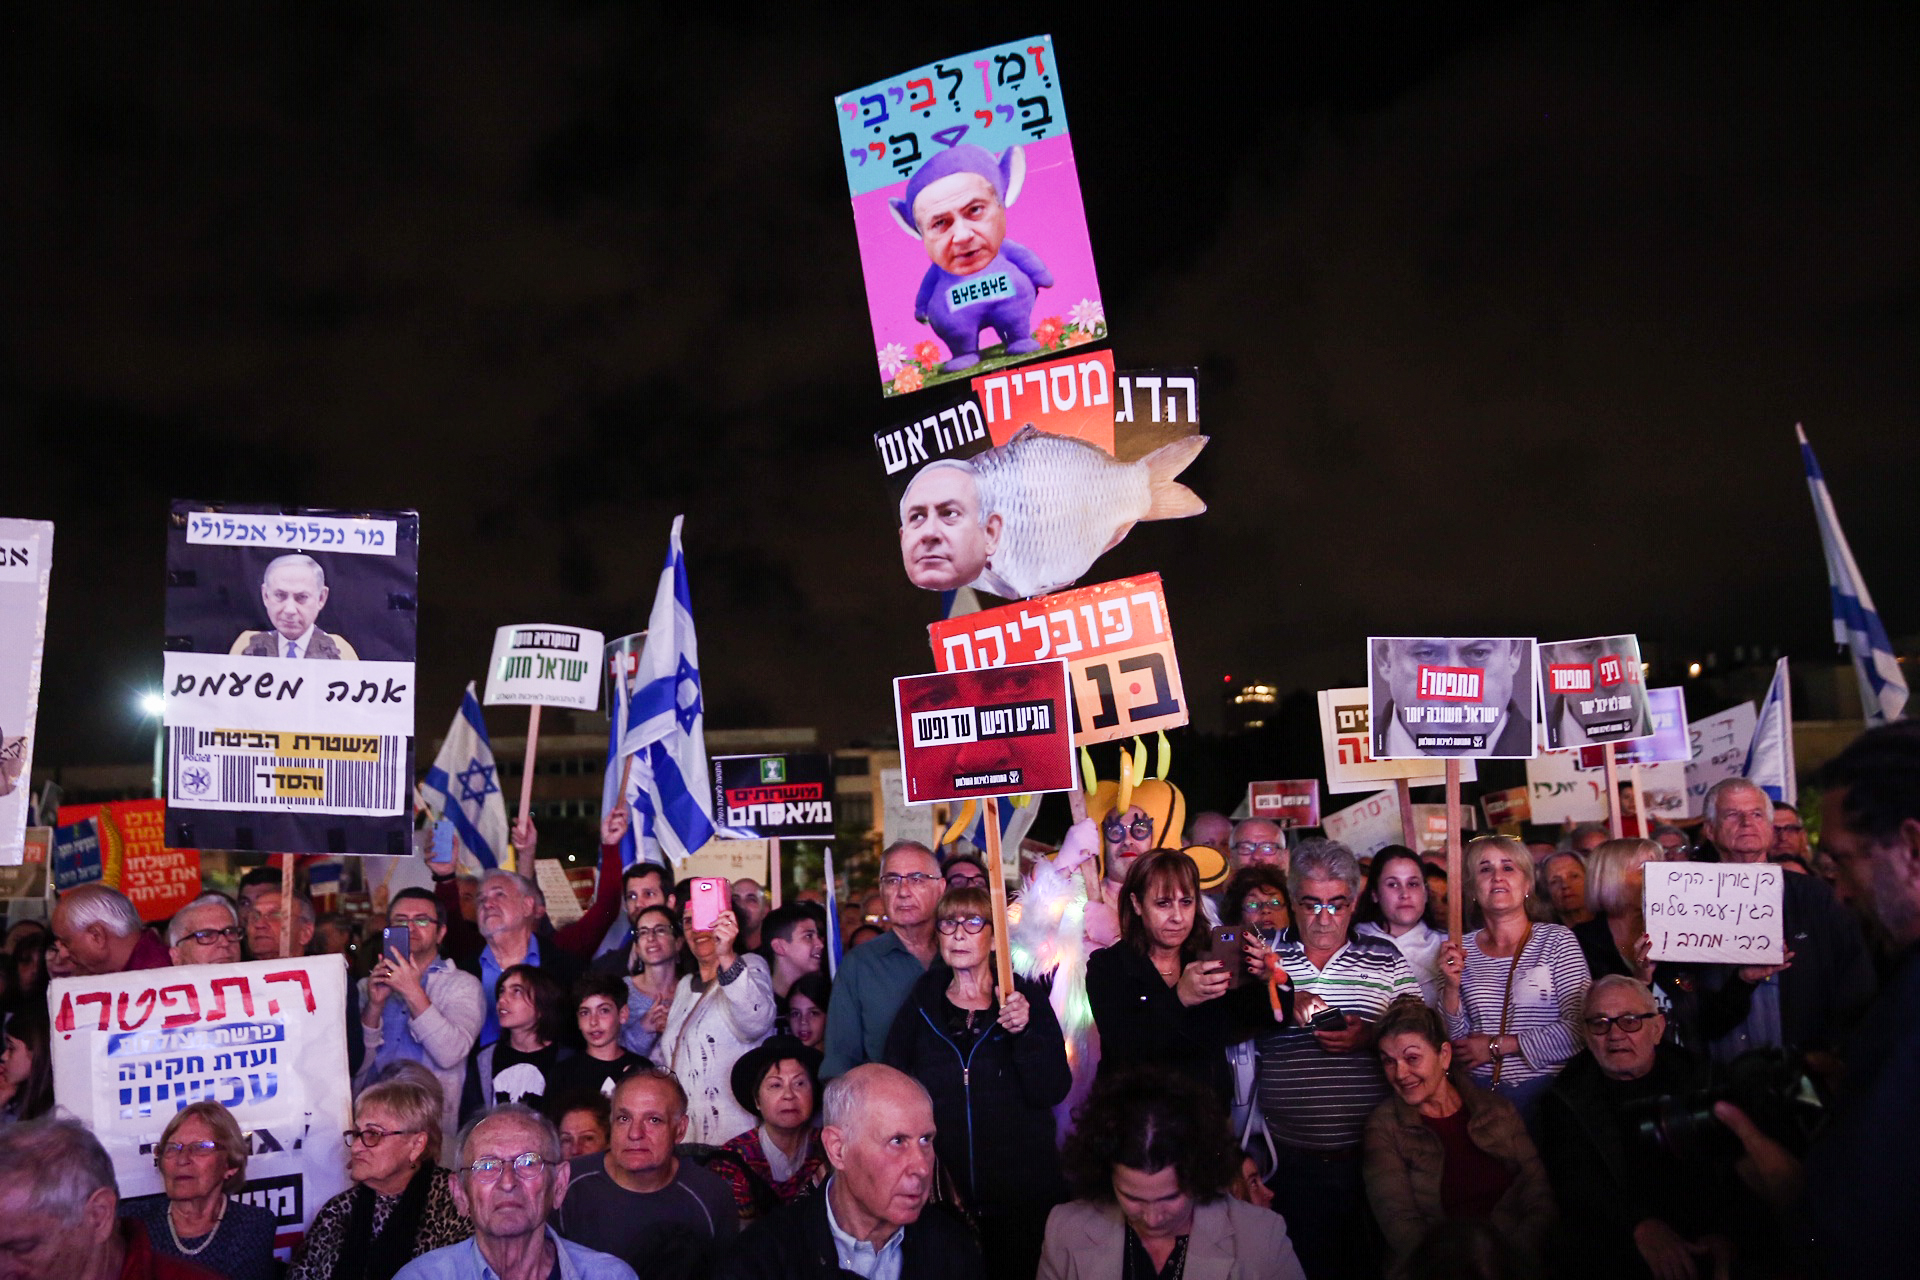 Tens of thousands of Israelis are calling for Netanyahu’s resignation